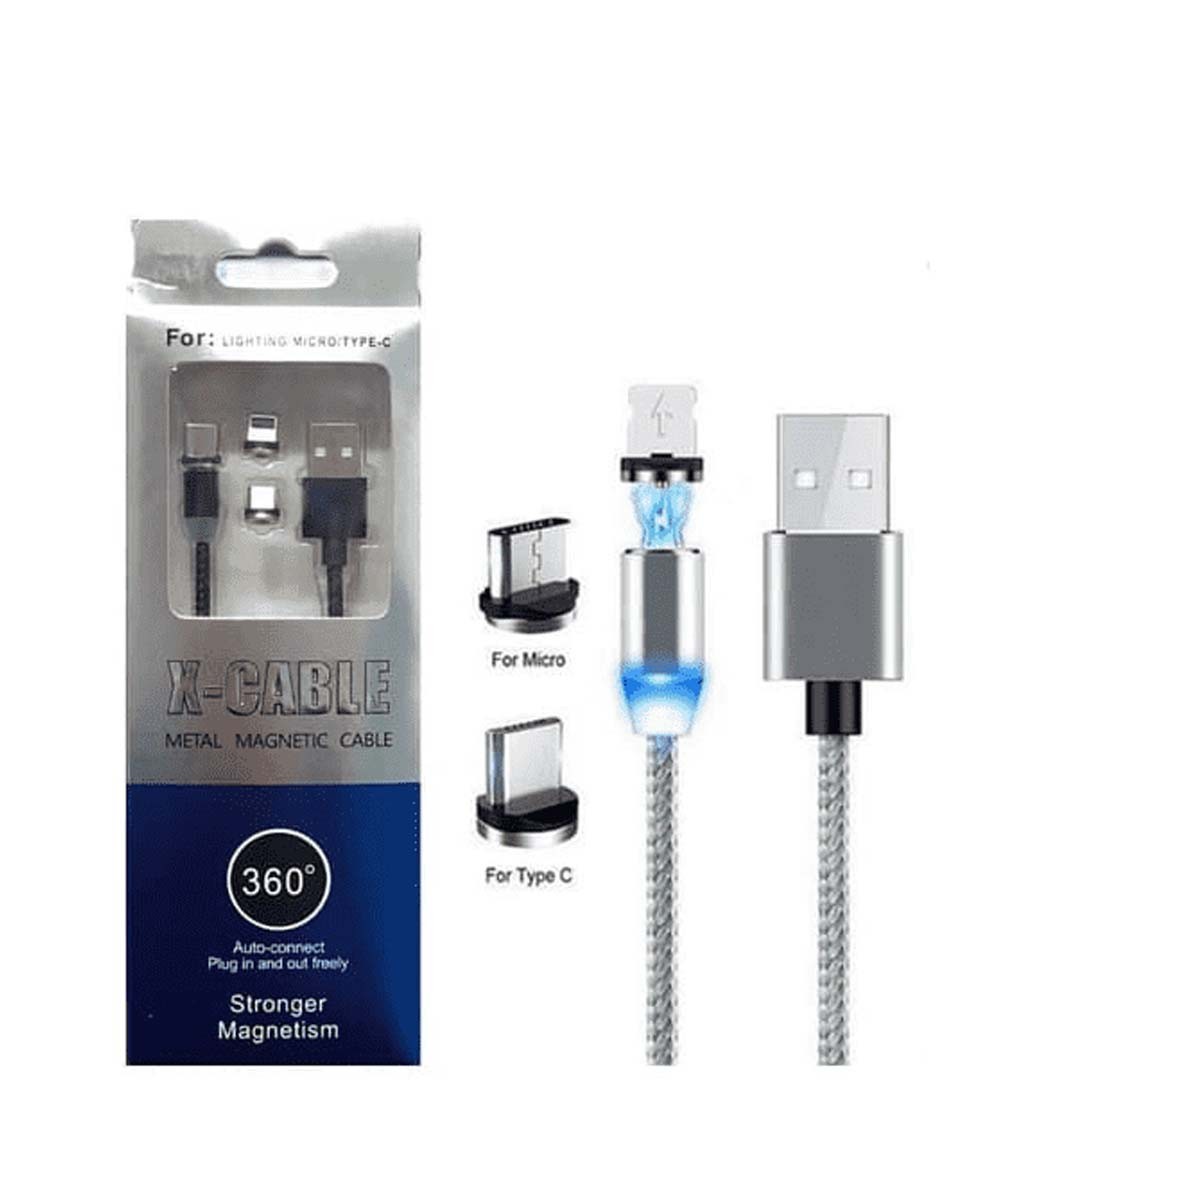 Escrupuloso Podrido Encarnar x-cable metal magnetic cable fast charging micro usb cable type-c magnet  charger-iphone